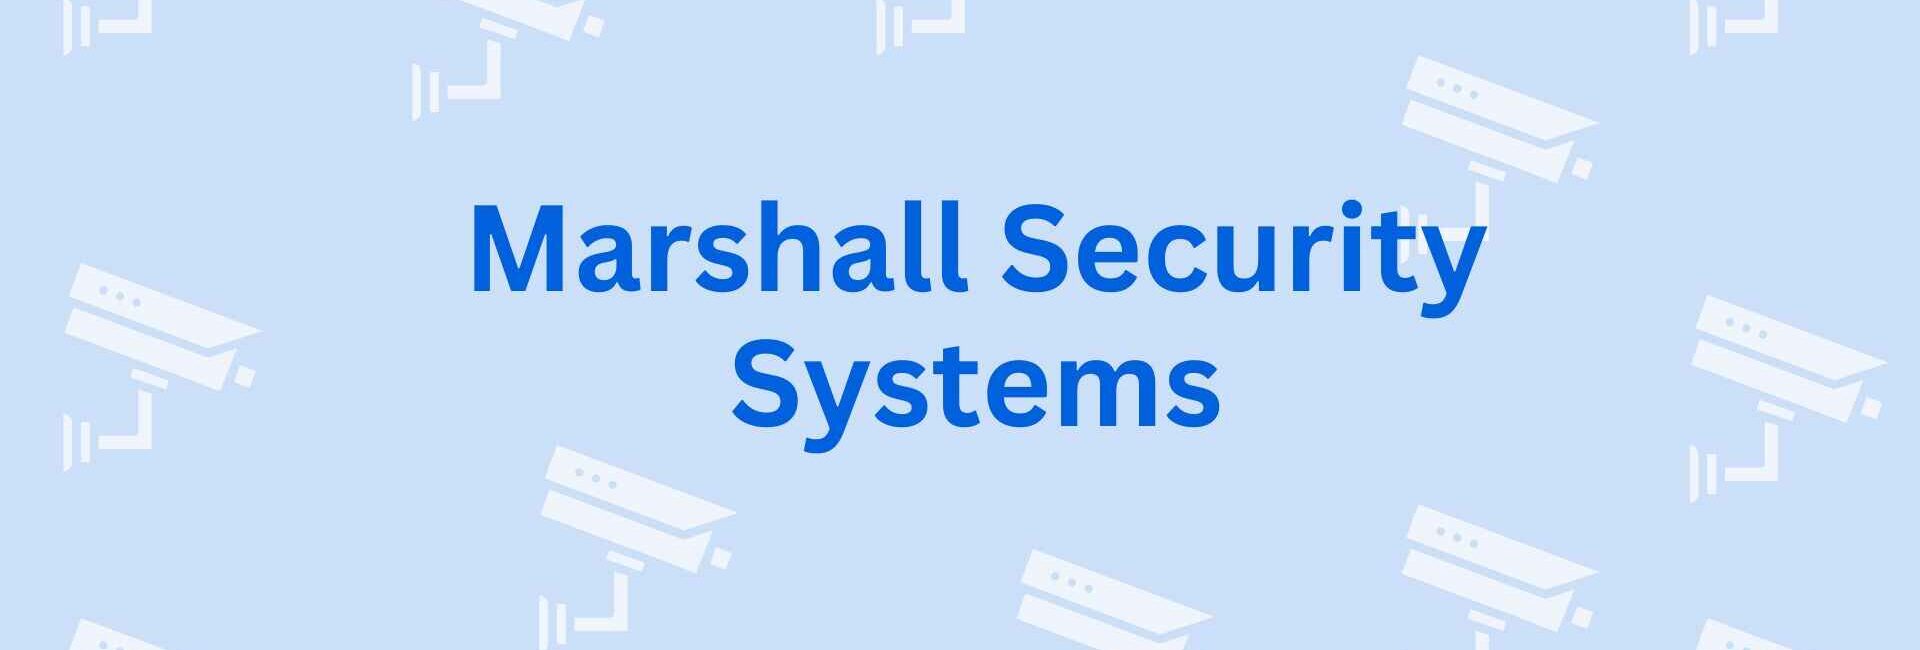 Marshall Security Systems - CCTV Dealer in Noida